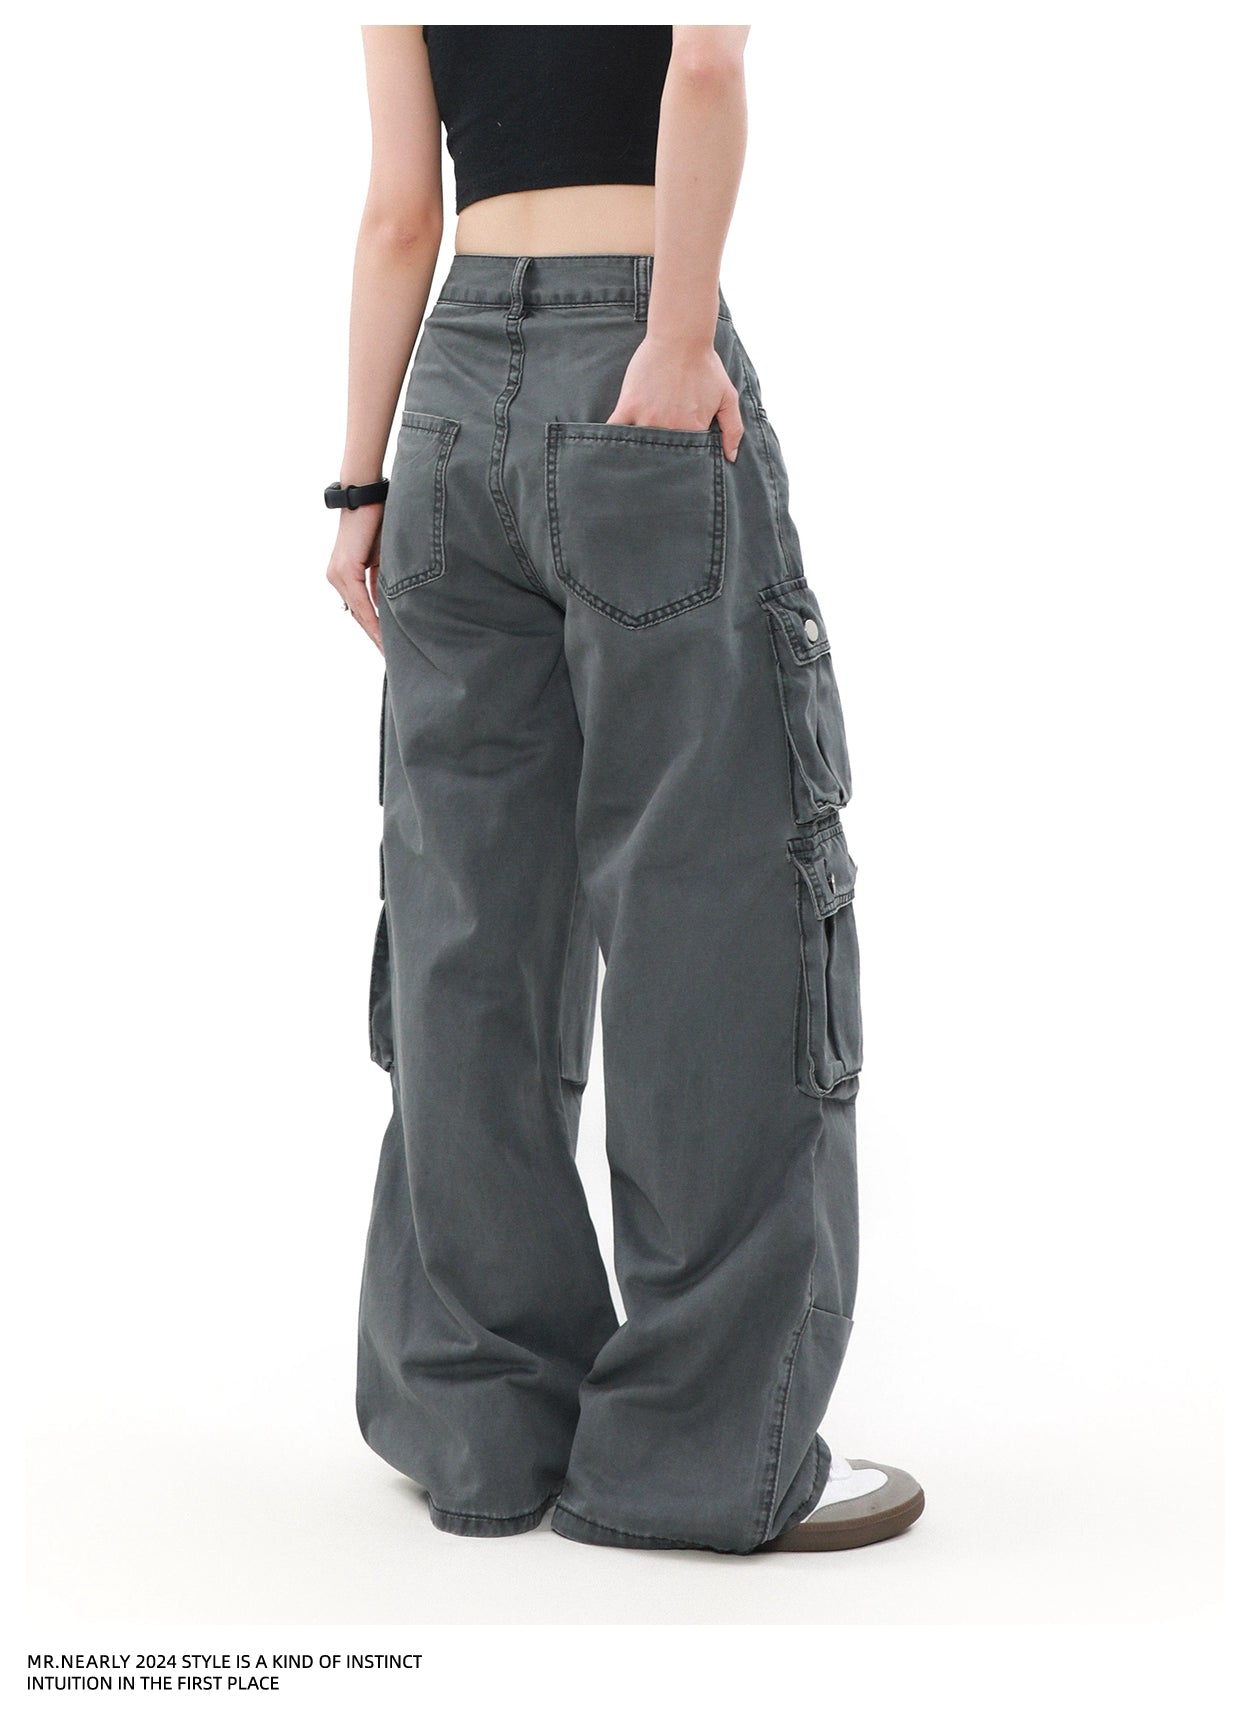 Functional Pocket Faded Cargo Pants Korean Street Fashion Pants By Mr Nearly Shop Online at OH Vault